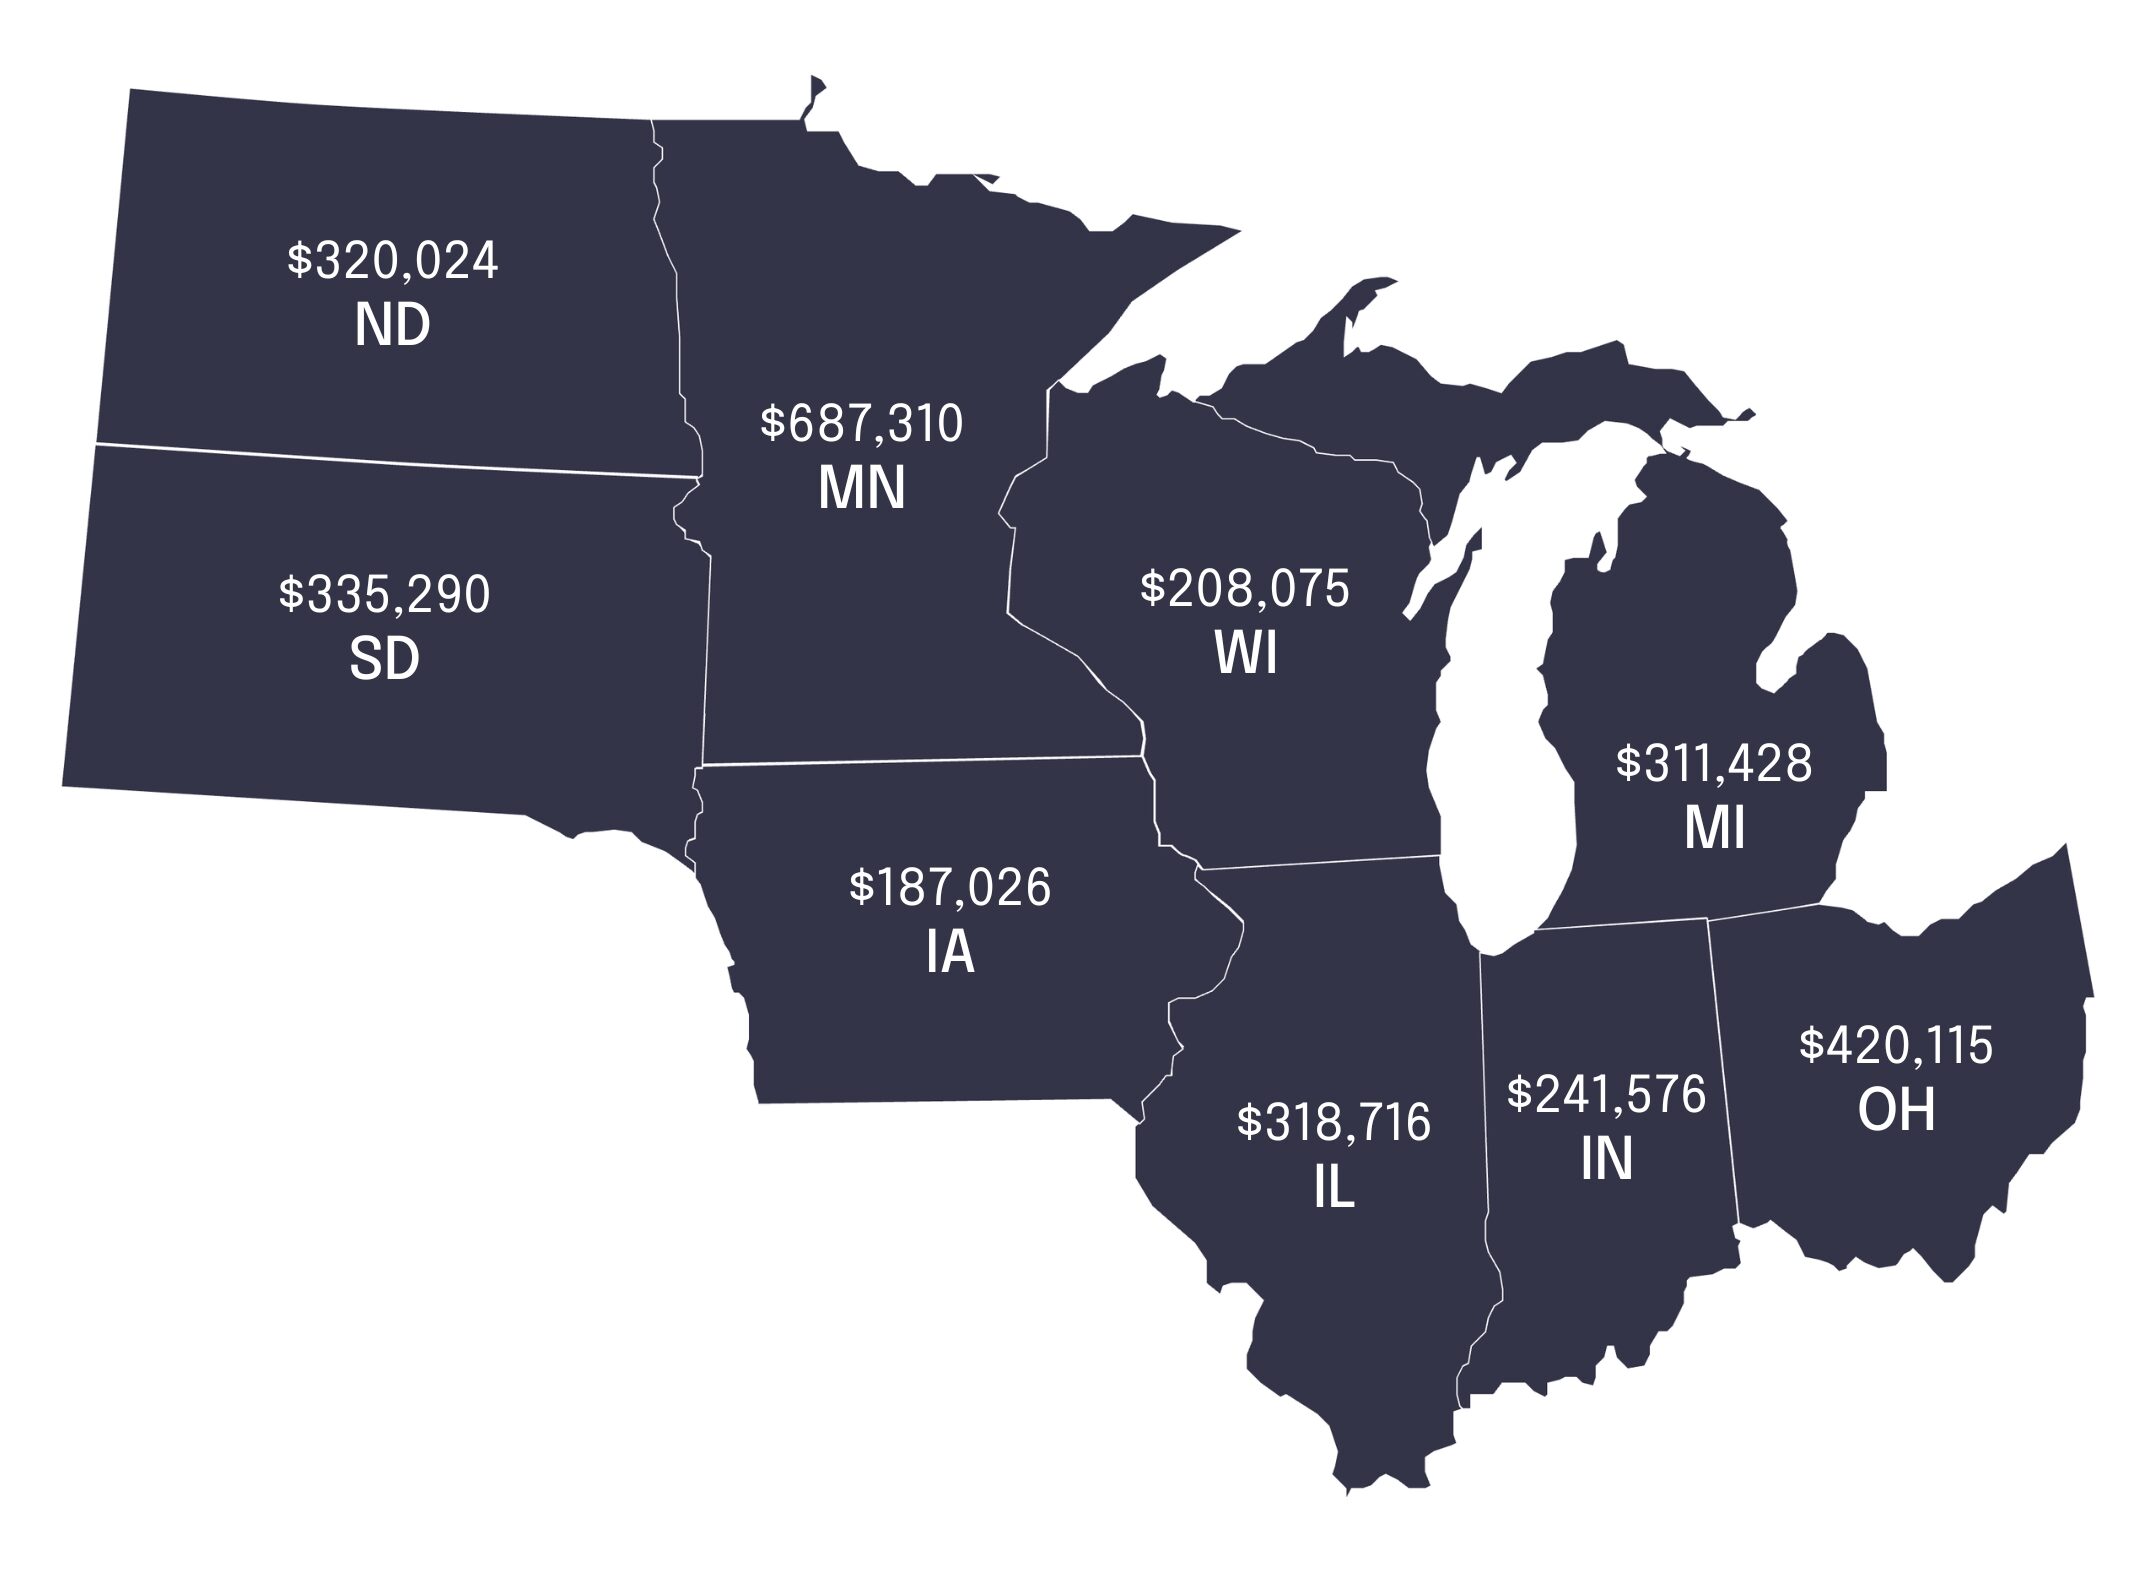 A map graphic showing a large return on investment to each Midwestern state.